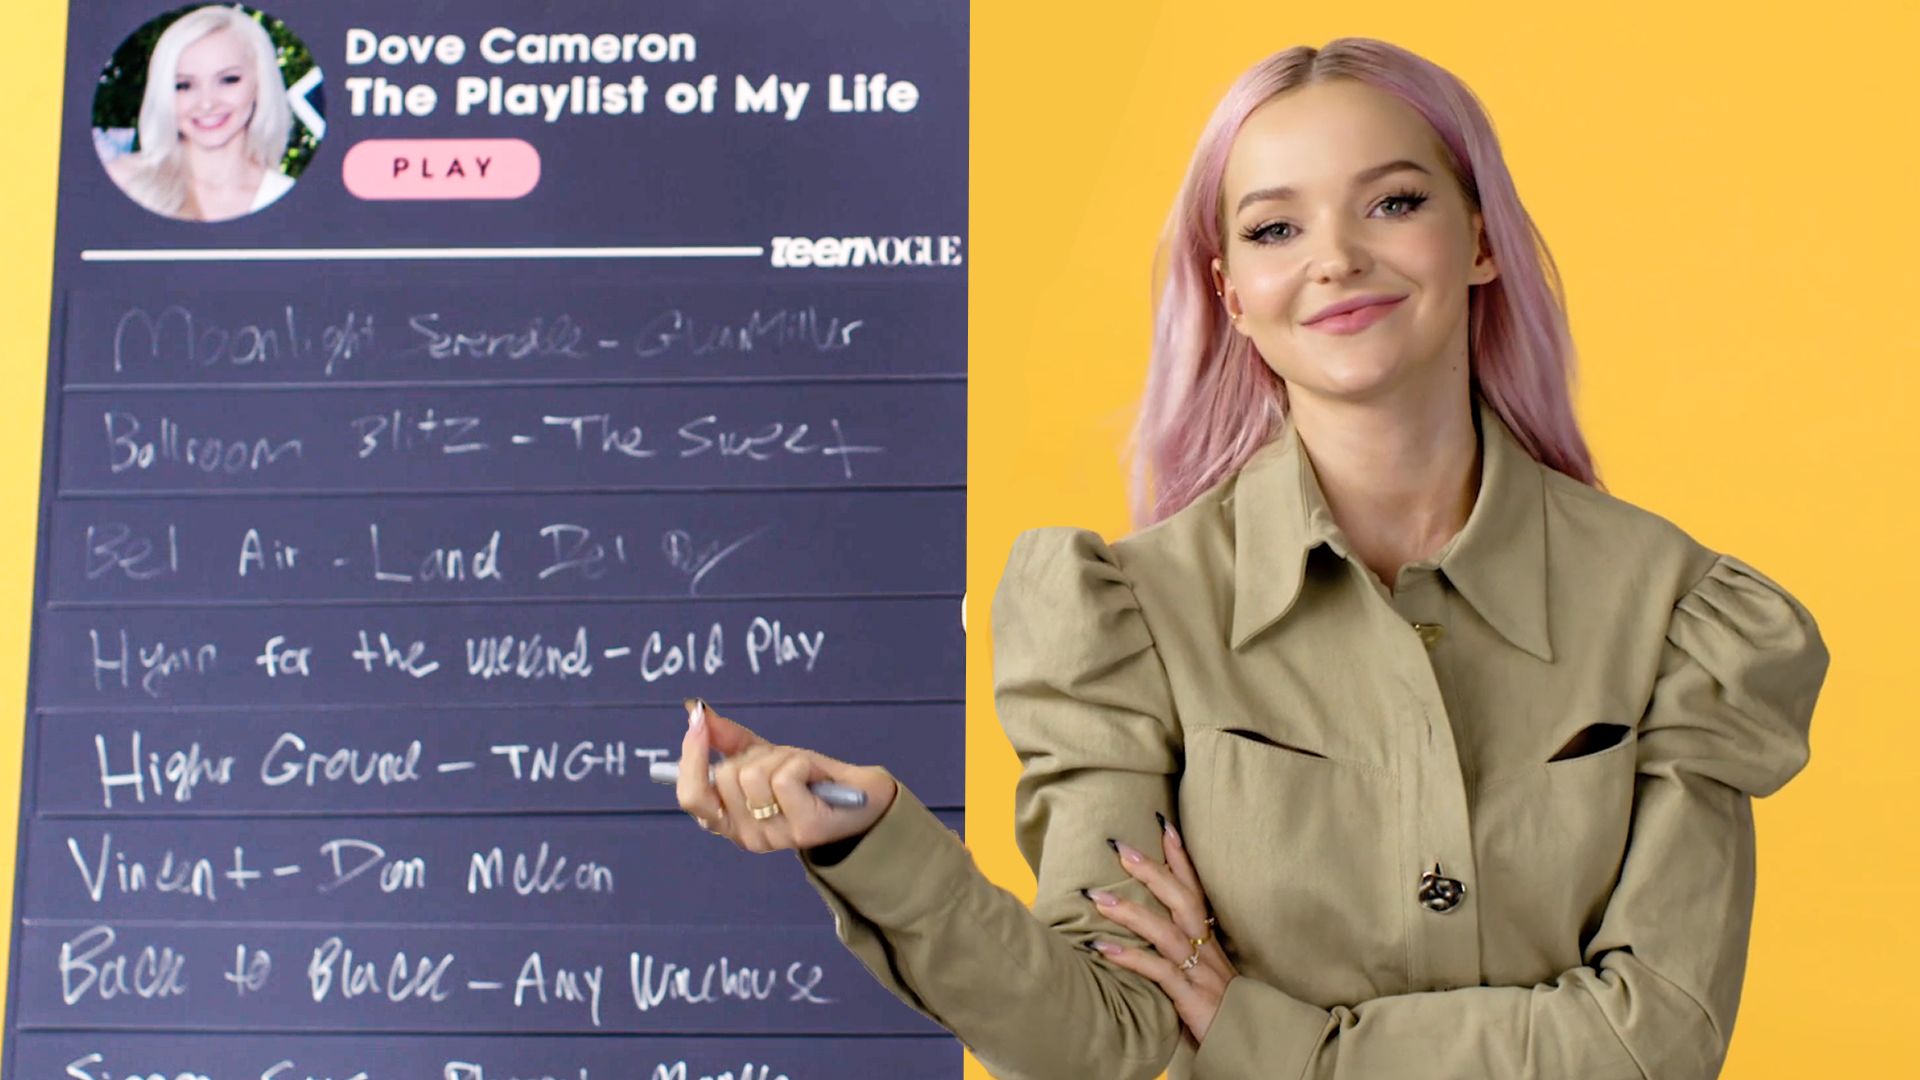 The love of her life. Dove Cameron песни. Boyfriend dove Cameron текст. The playlist of your Life.